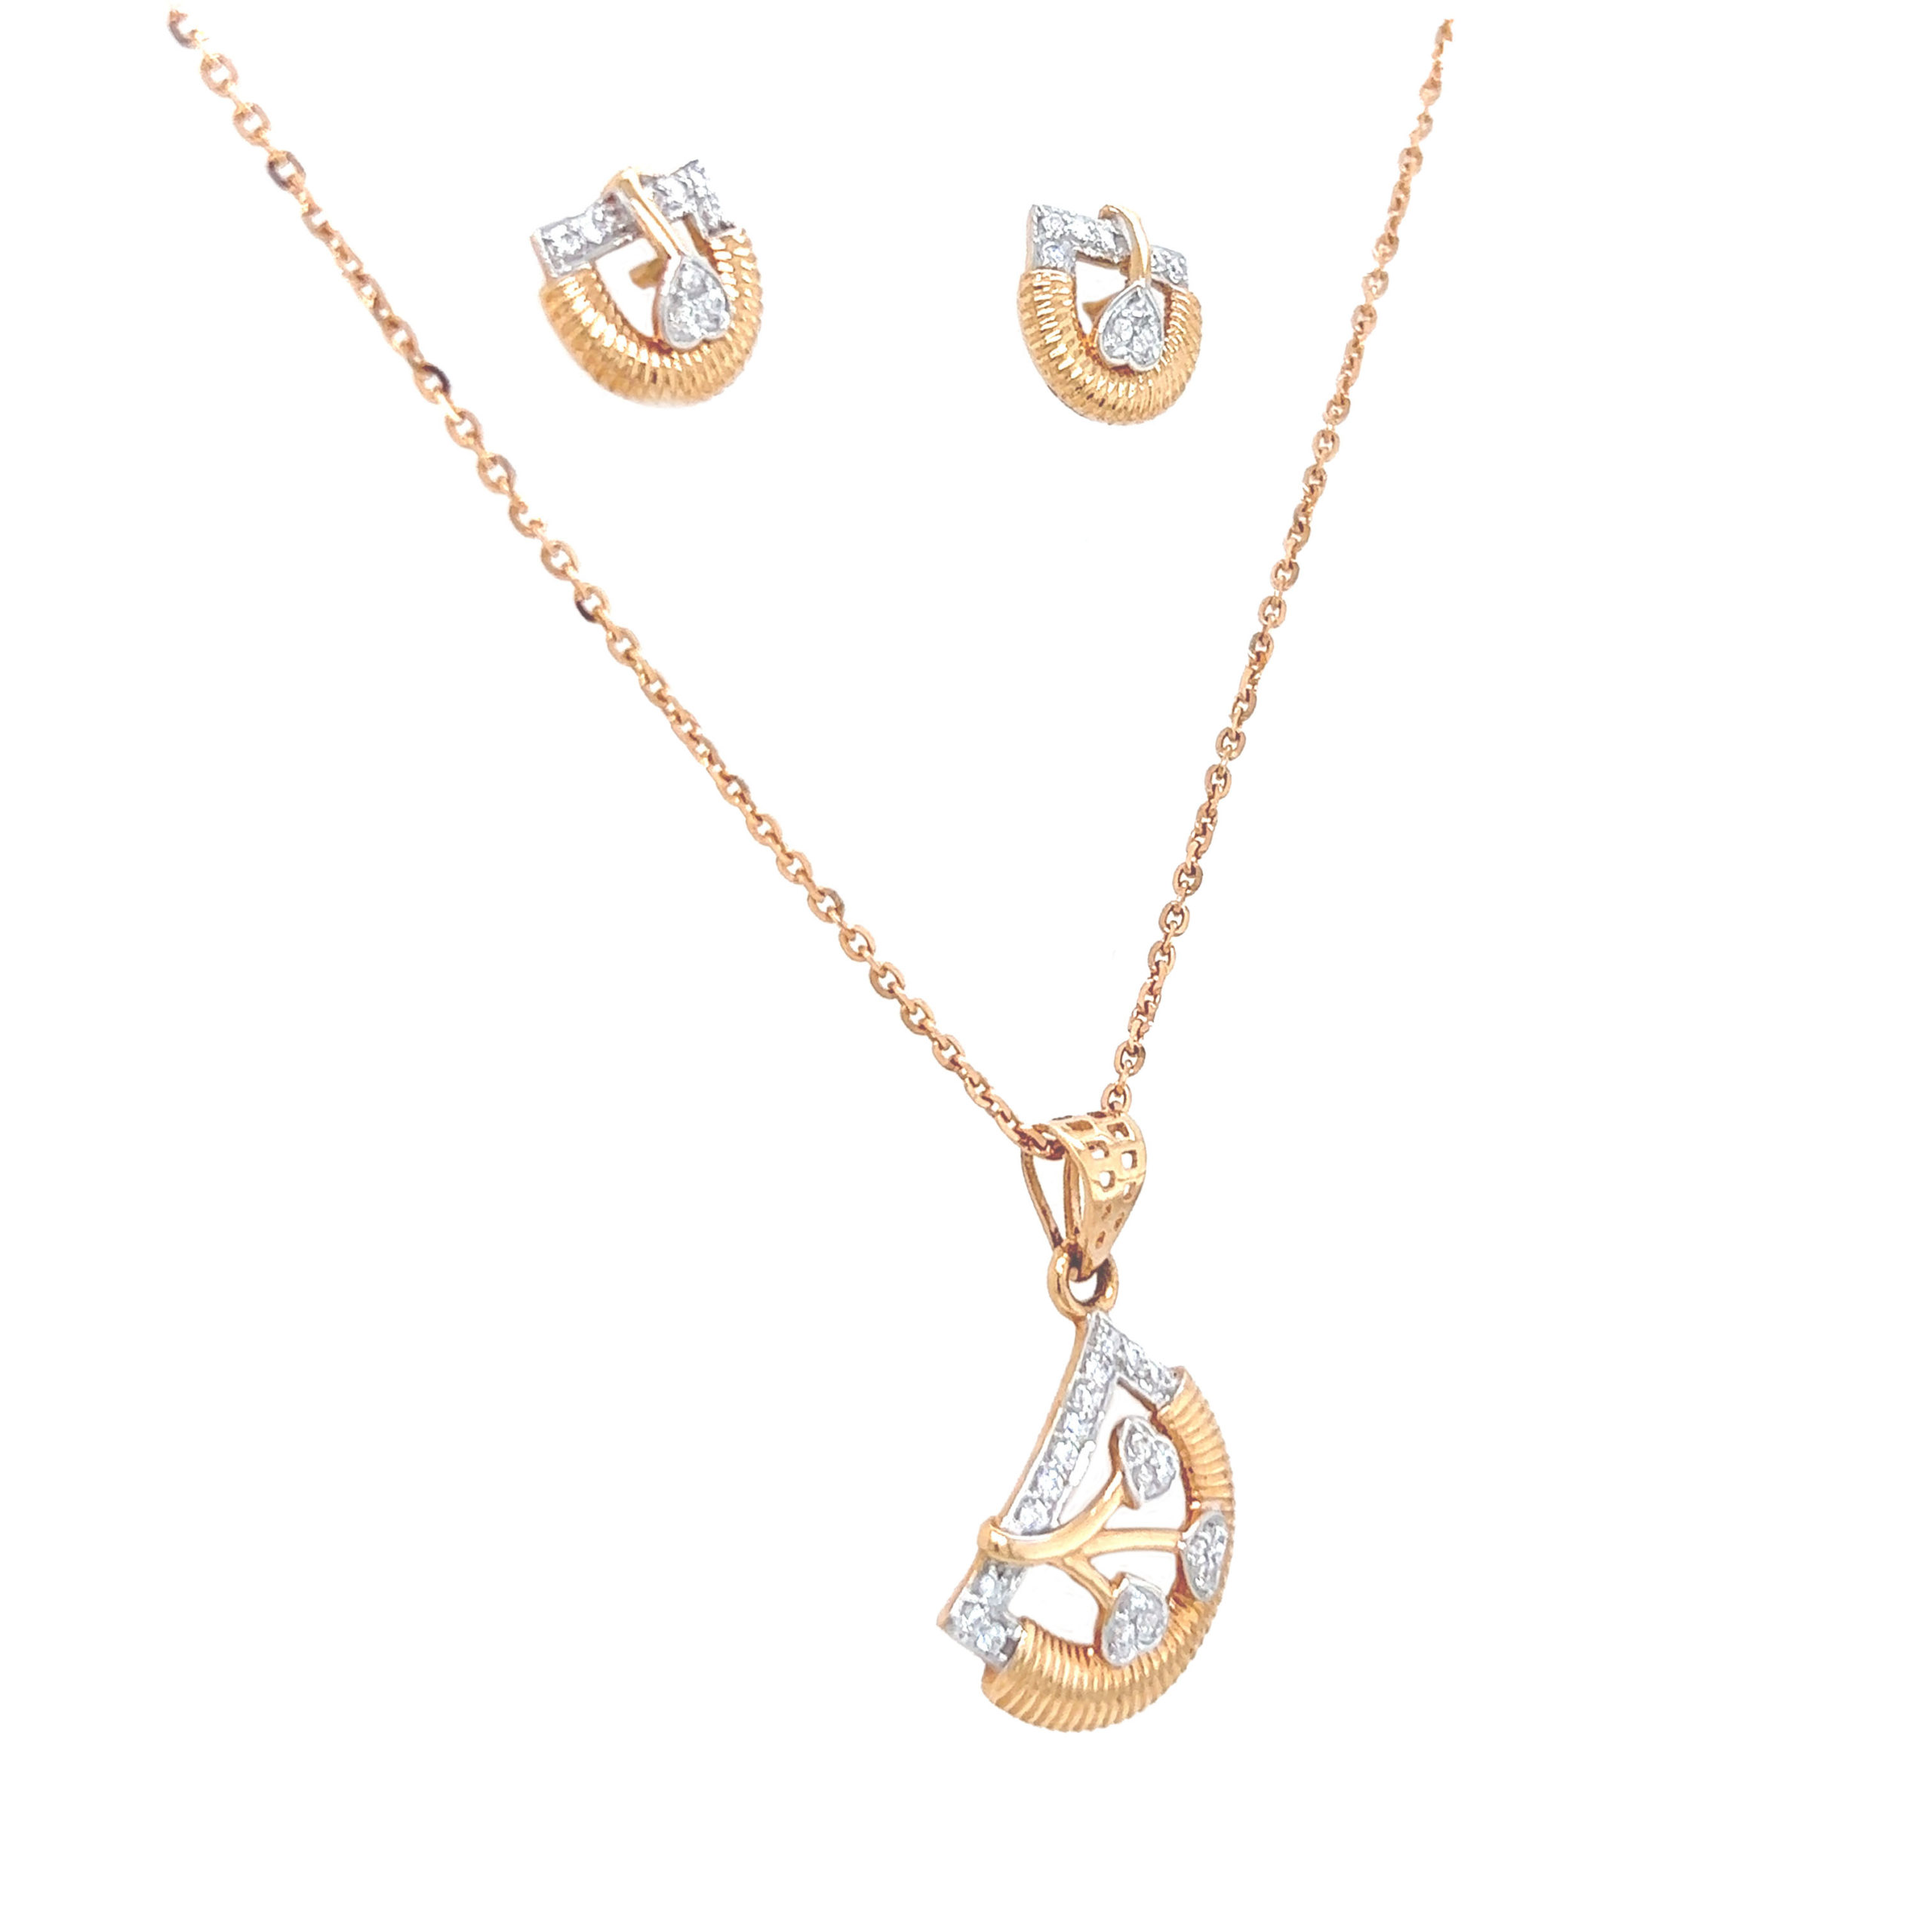 5 Sets Dainty Rose Gold Plated Crystal Bridesmaid Jewelry